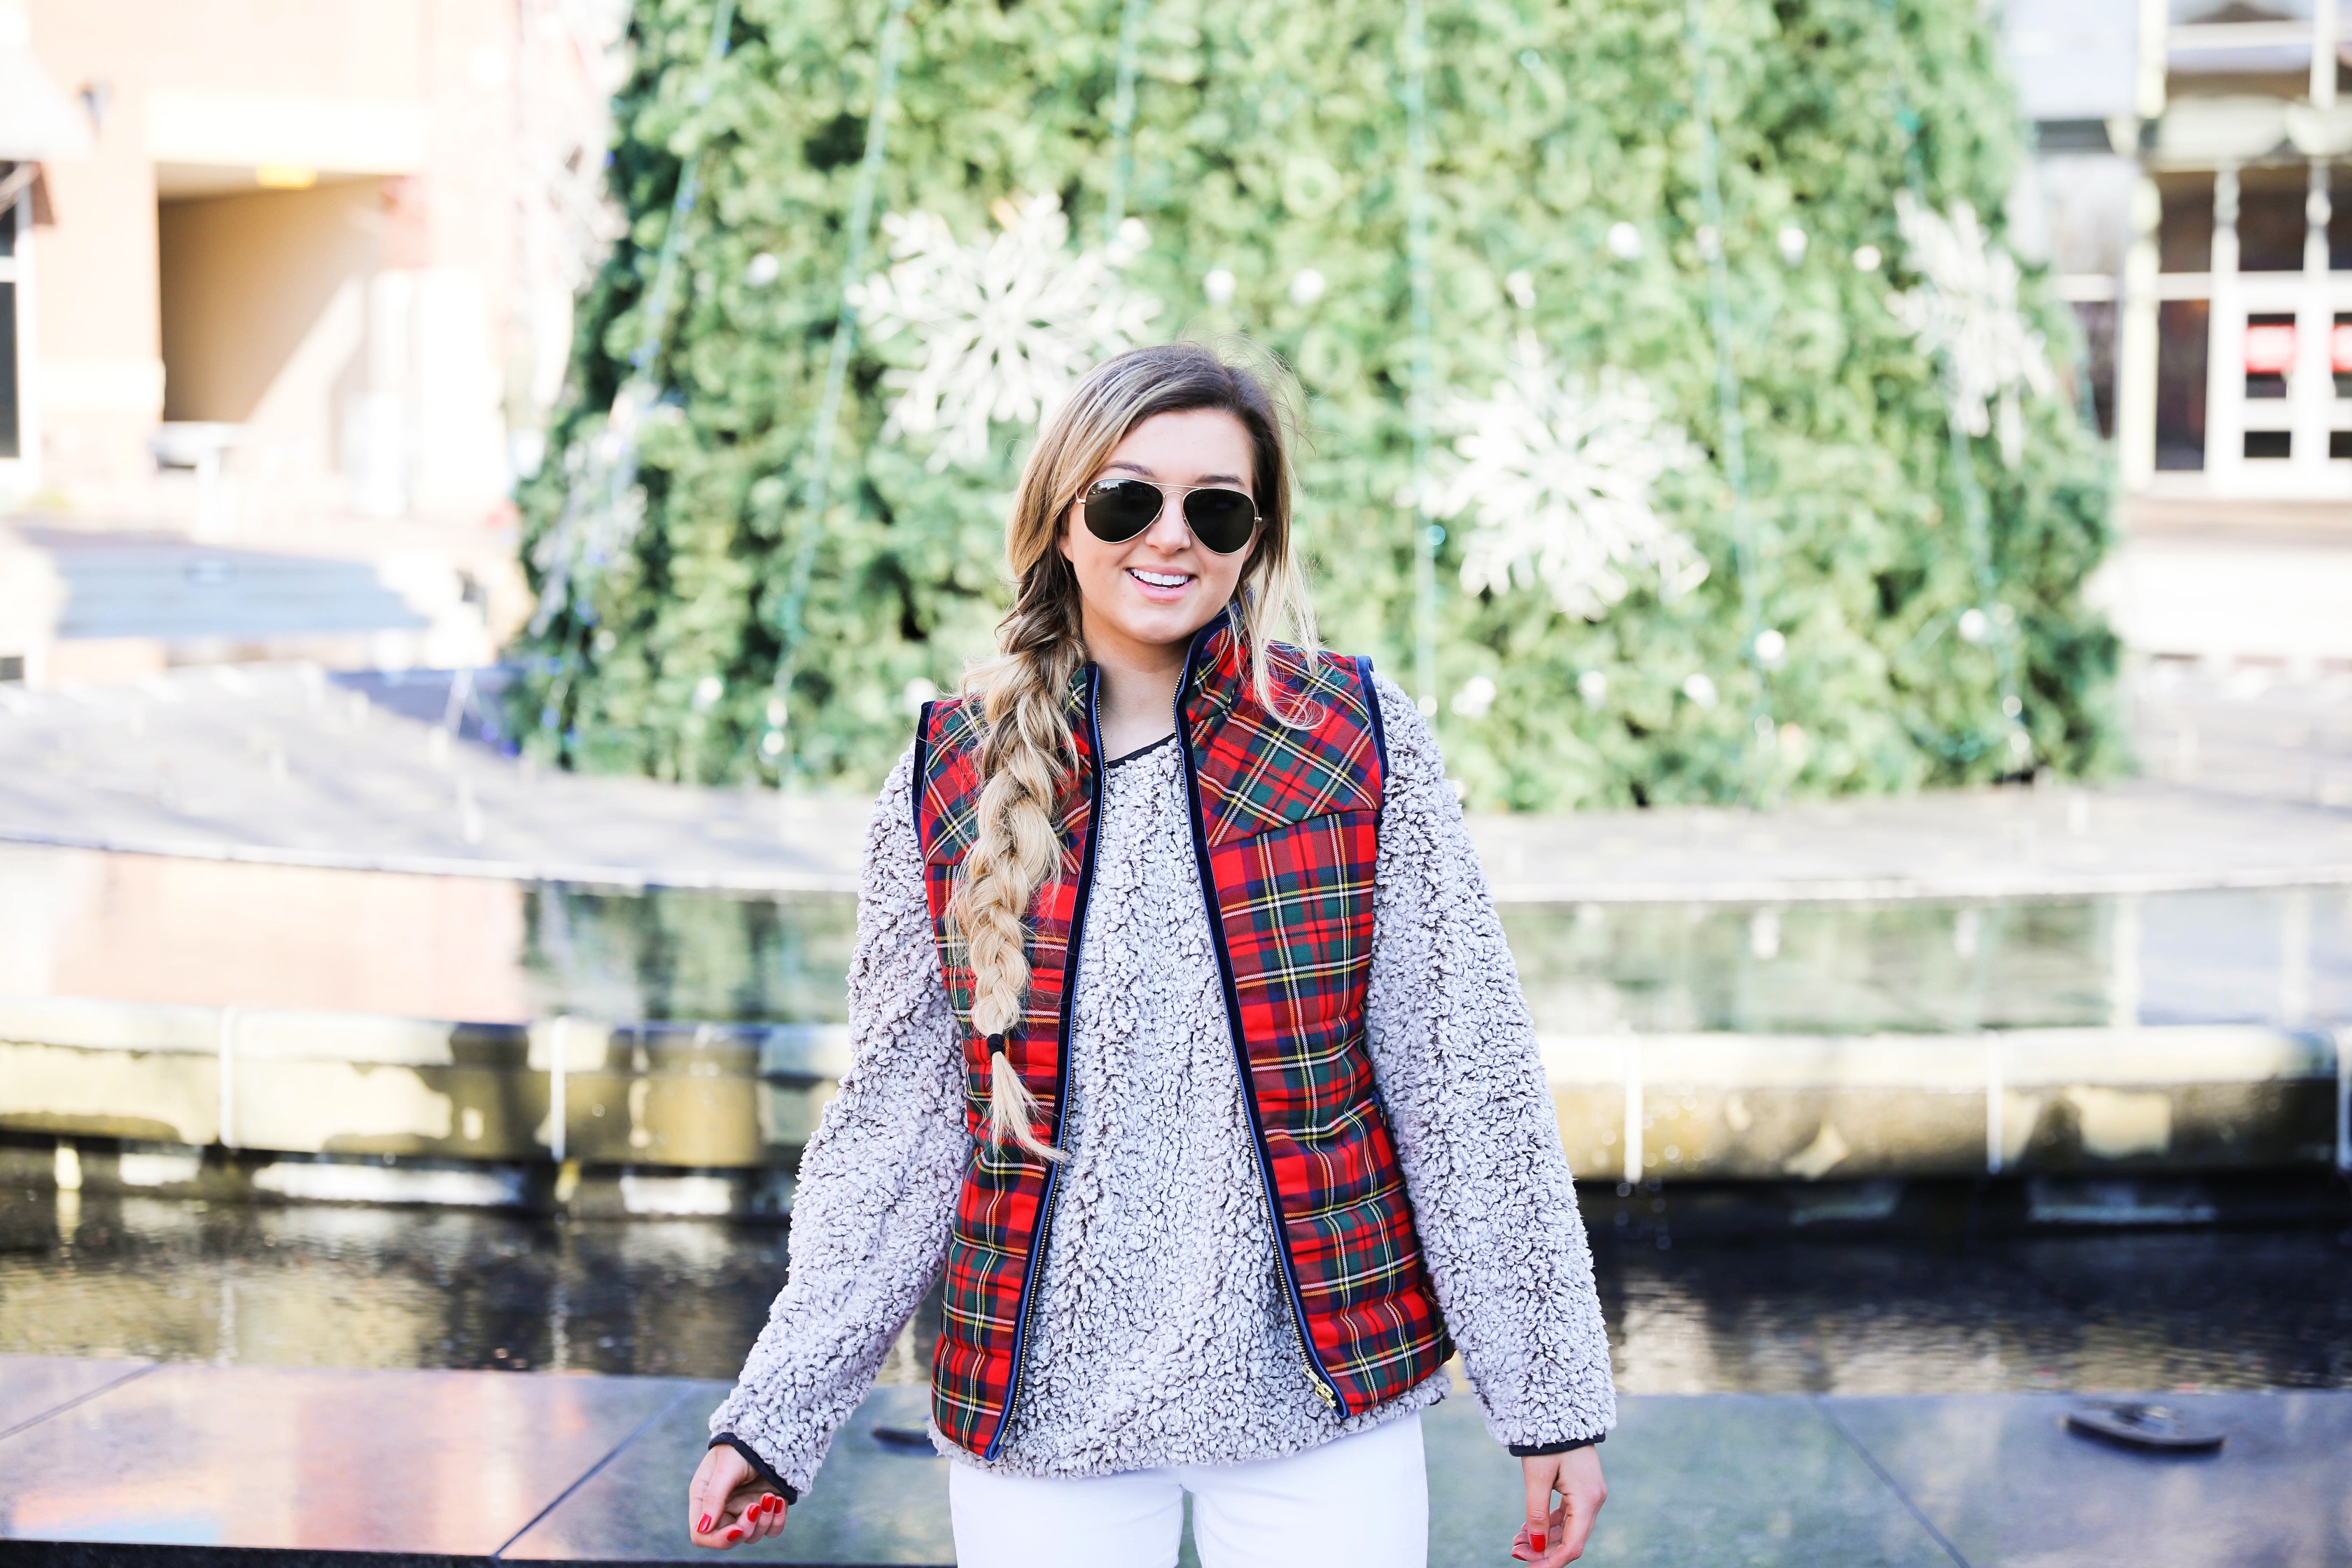 Tartan plaid j.crew vest with Dylan true grit comfy crewneck sweatshirt with white ripped jeans and side braid with long hair. Find the details for this winter outfit on fashion blog daily dose of charm by lauren Lindmark